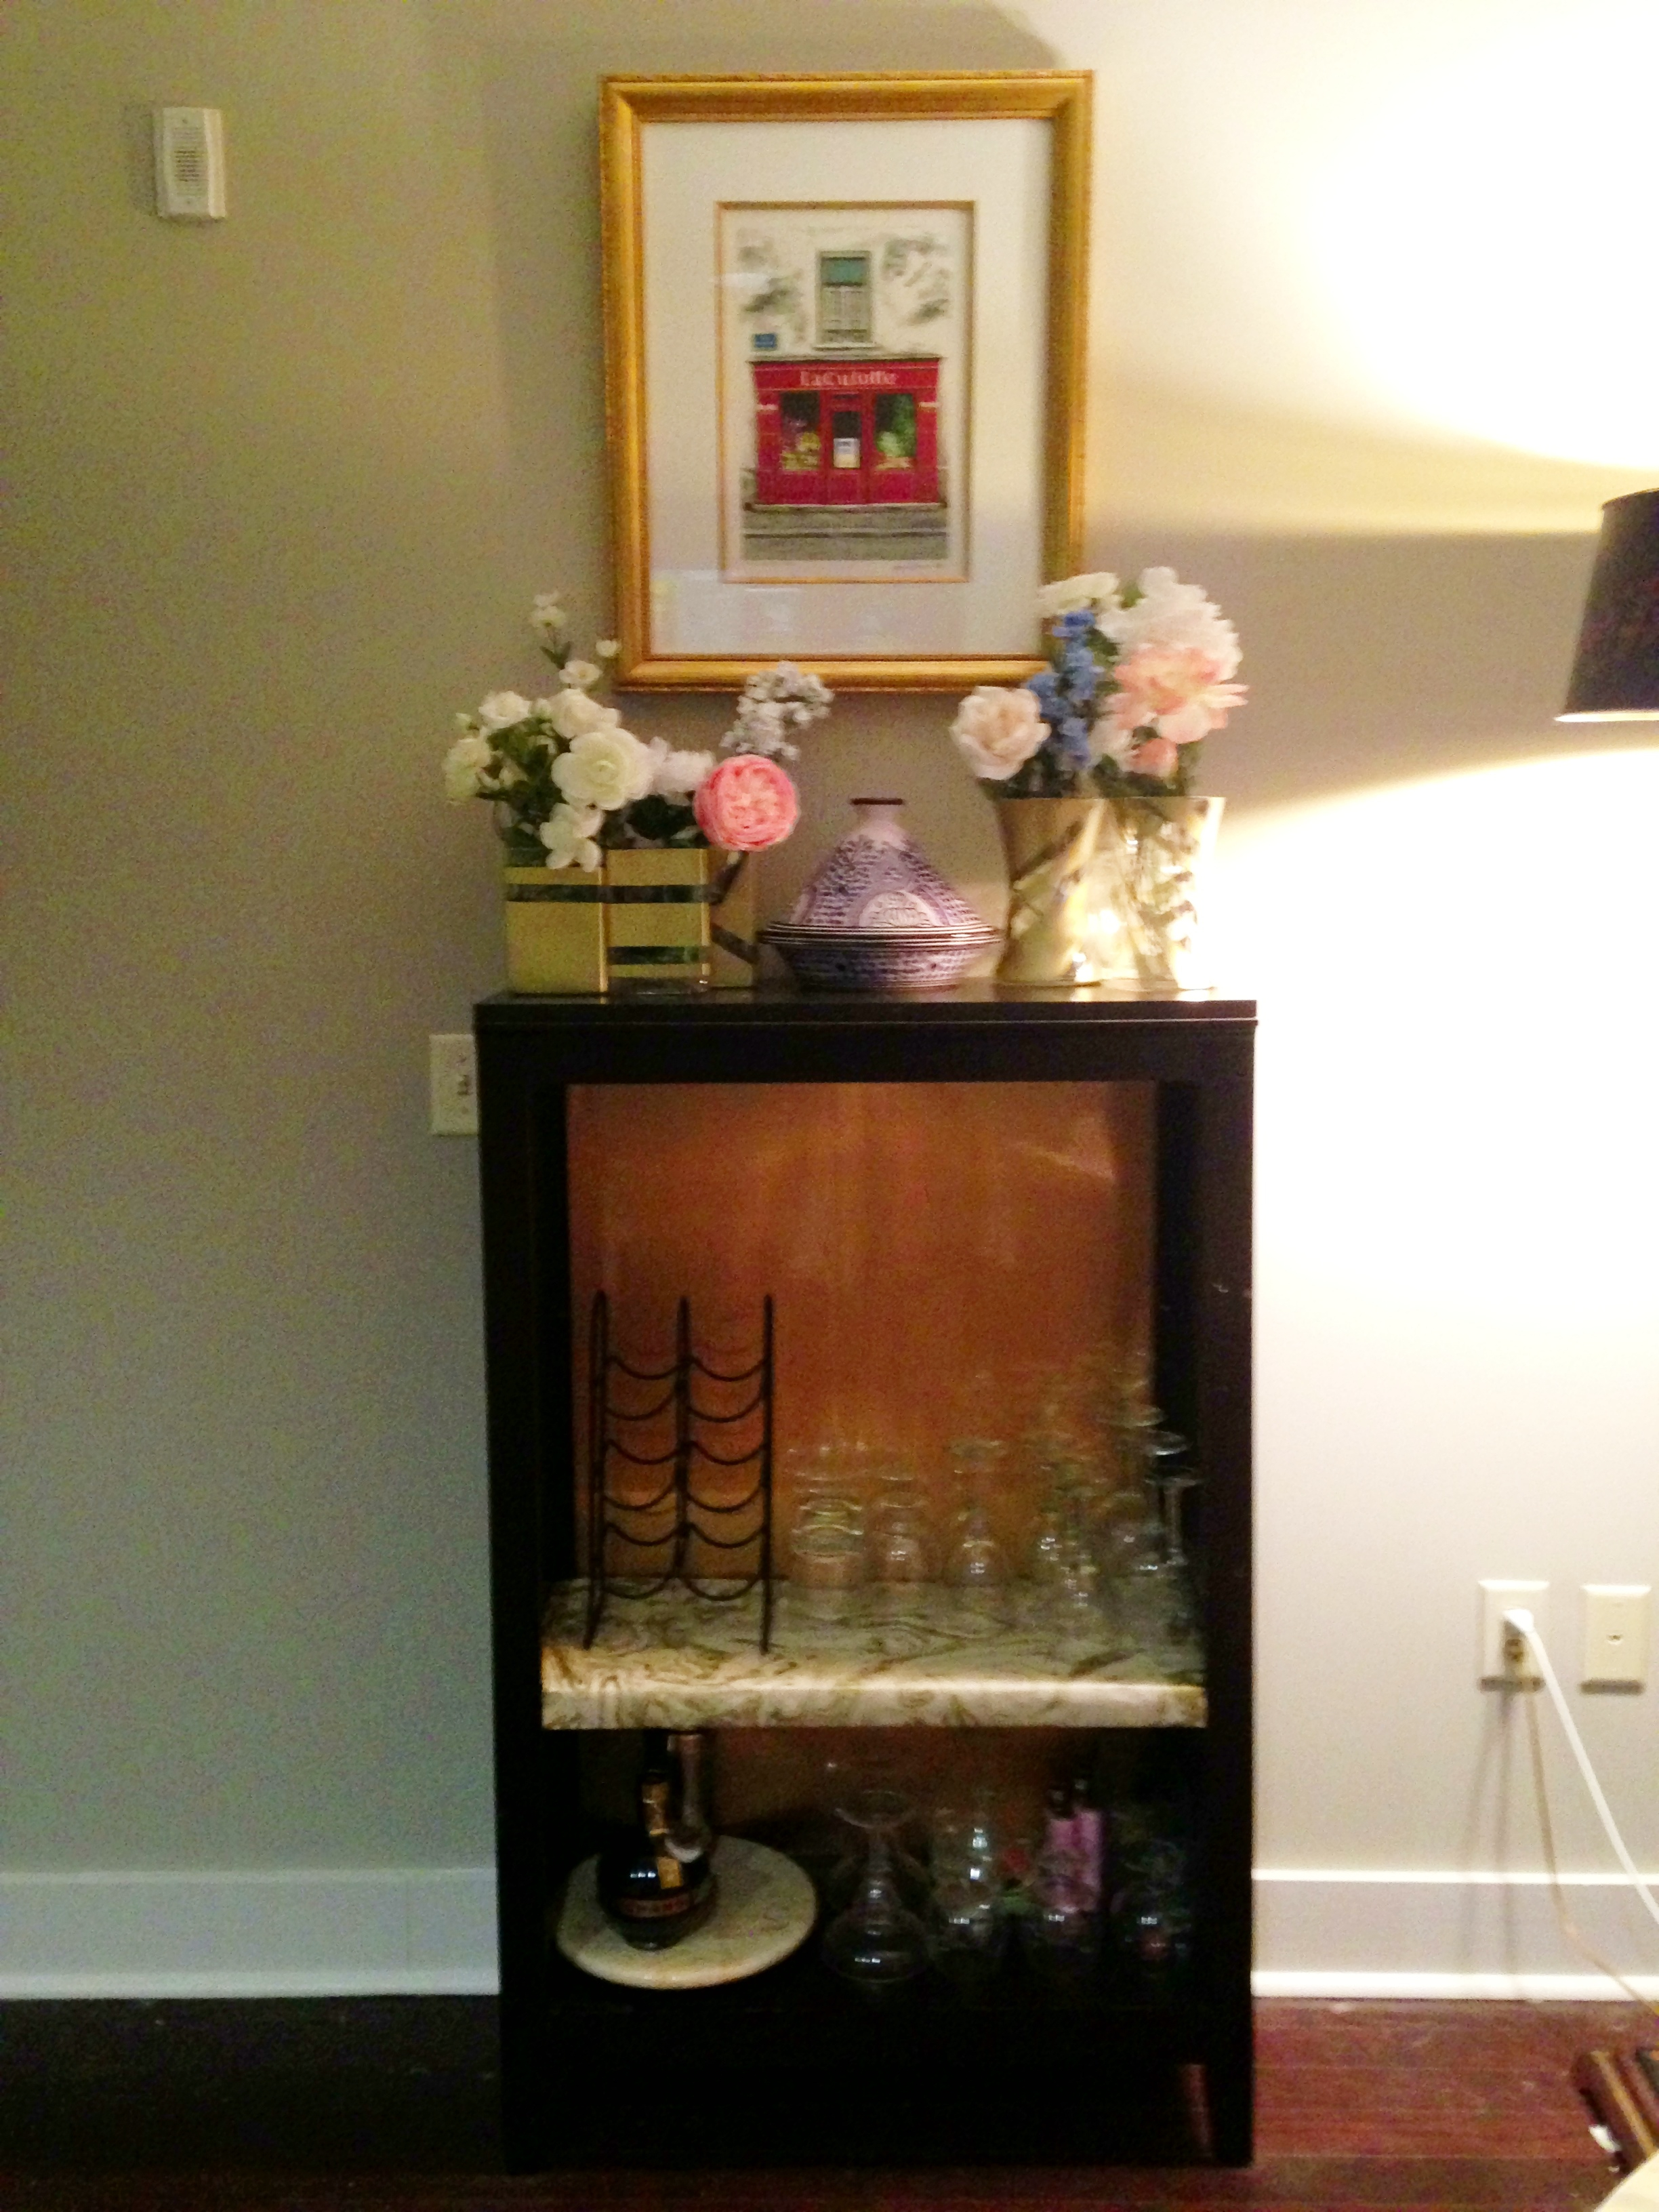 Diy Bar Cabinet Order In The Kitchen pertaining to dimensions 2448 X 3264